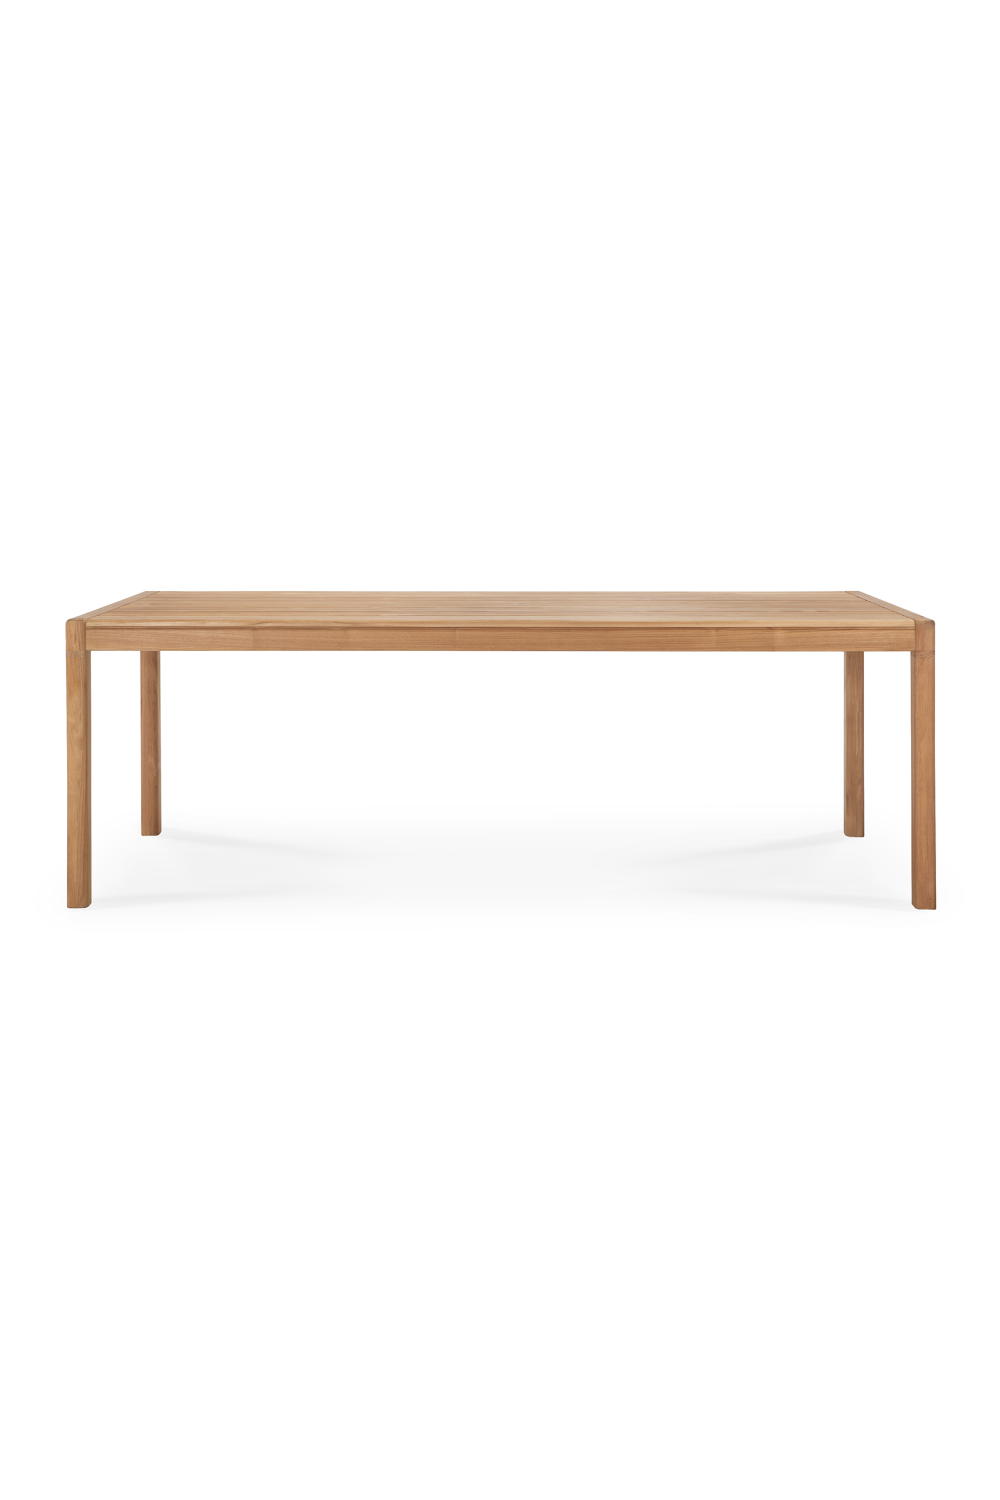 Solid Teak Outdoor Dining Table | Ethnicraft Jack | Oroa.com